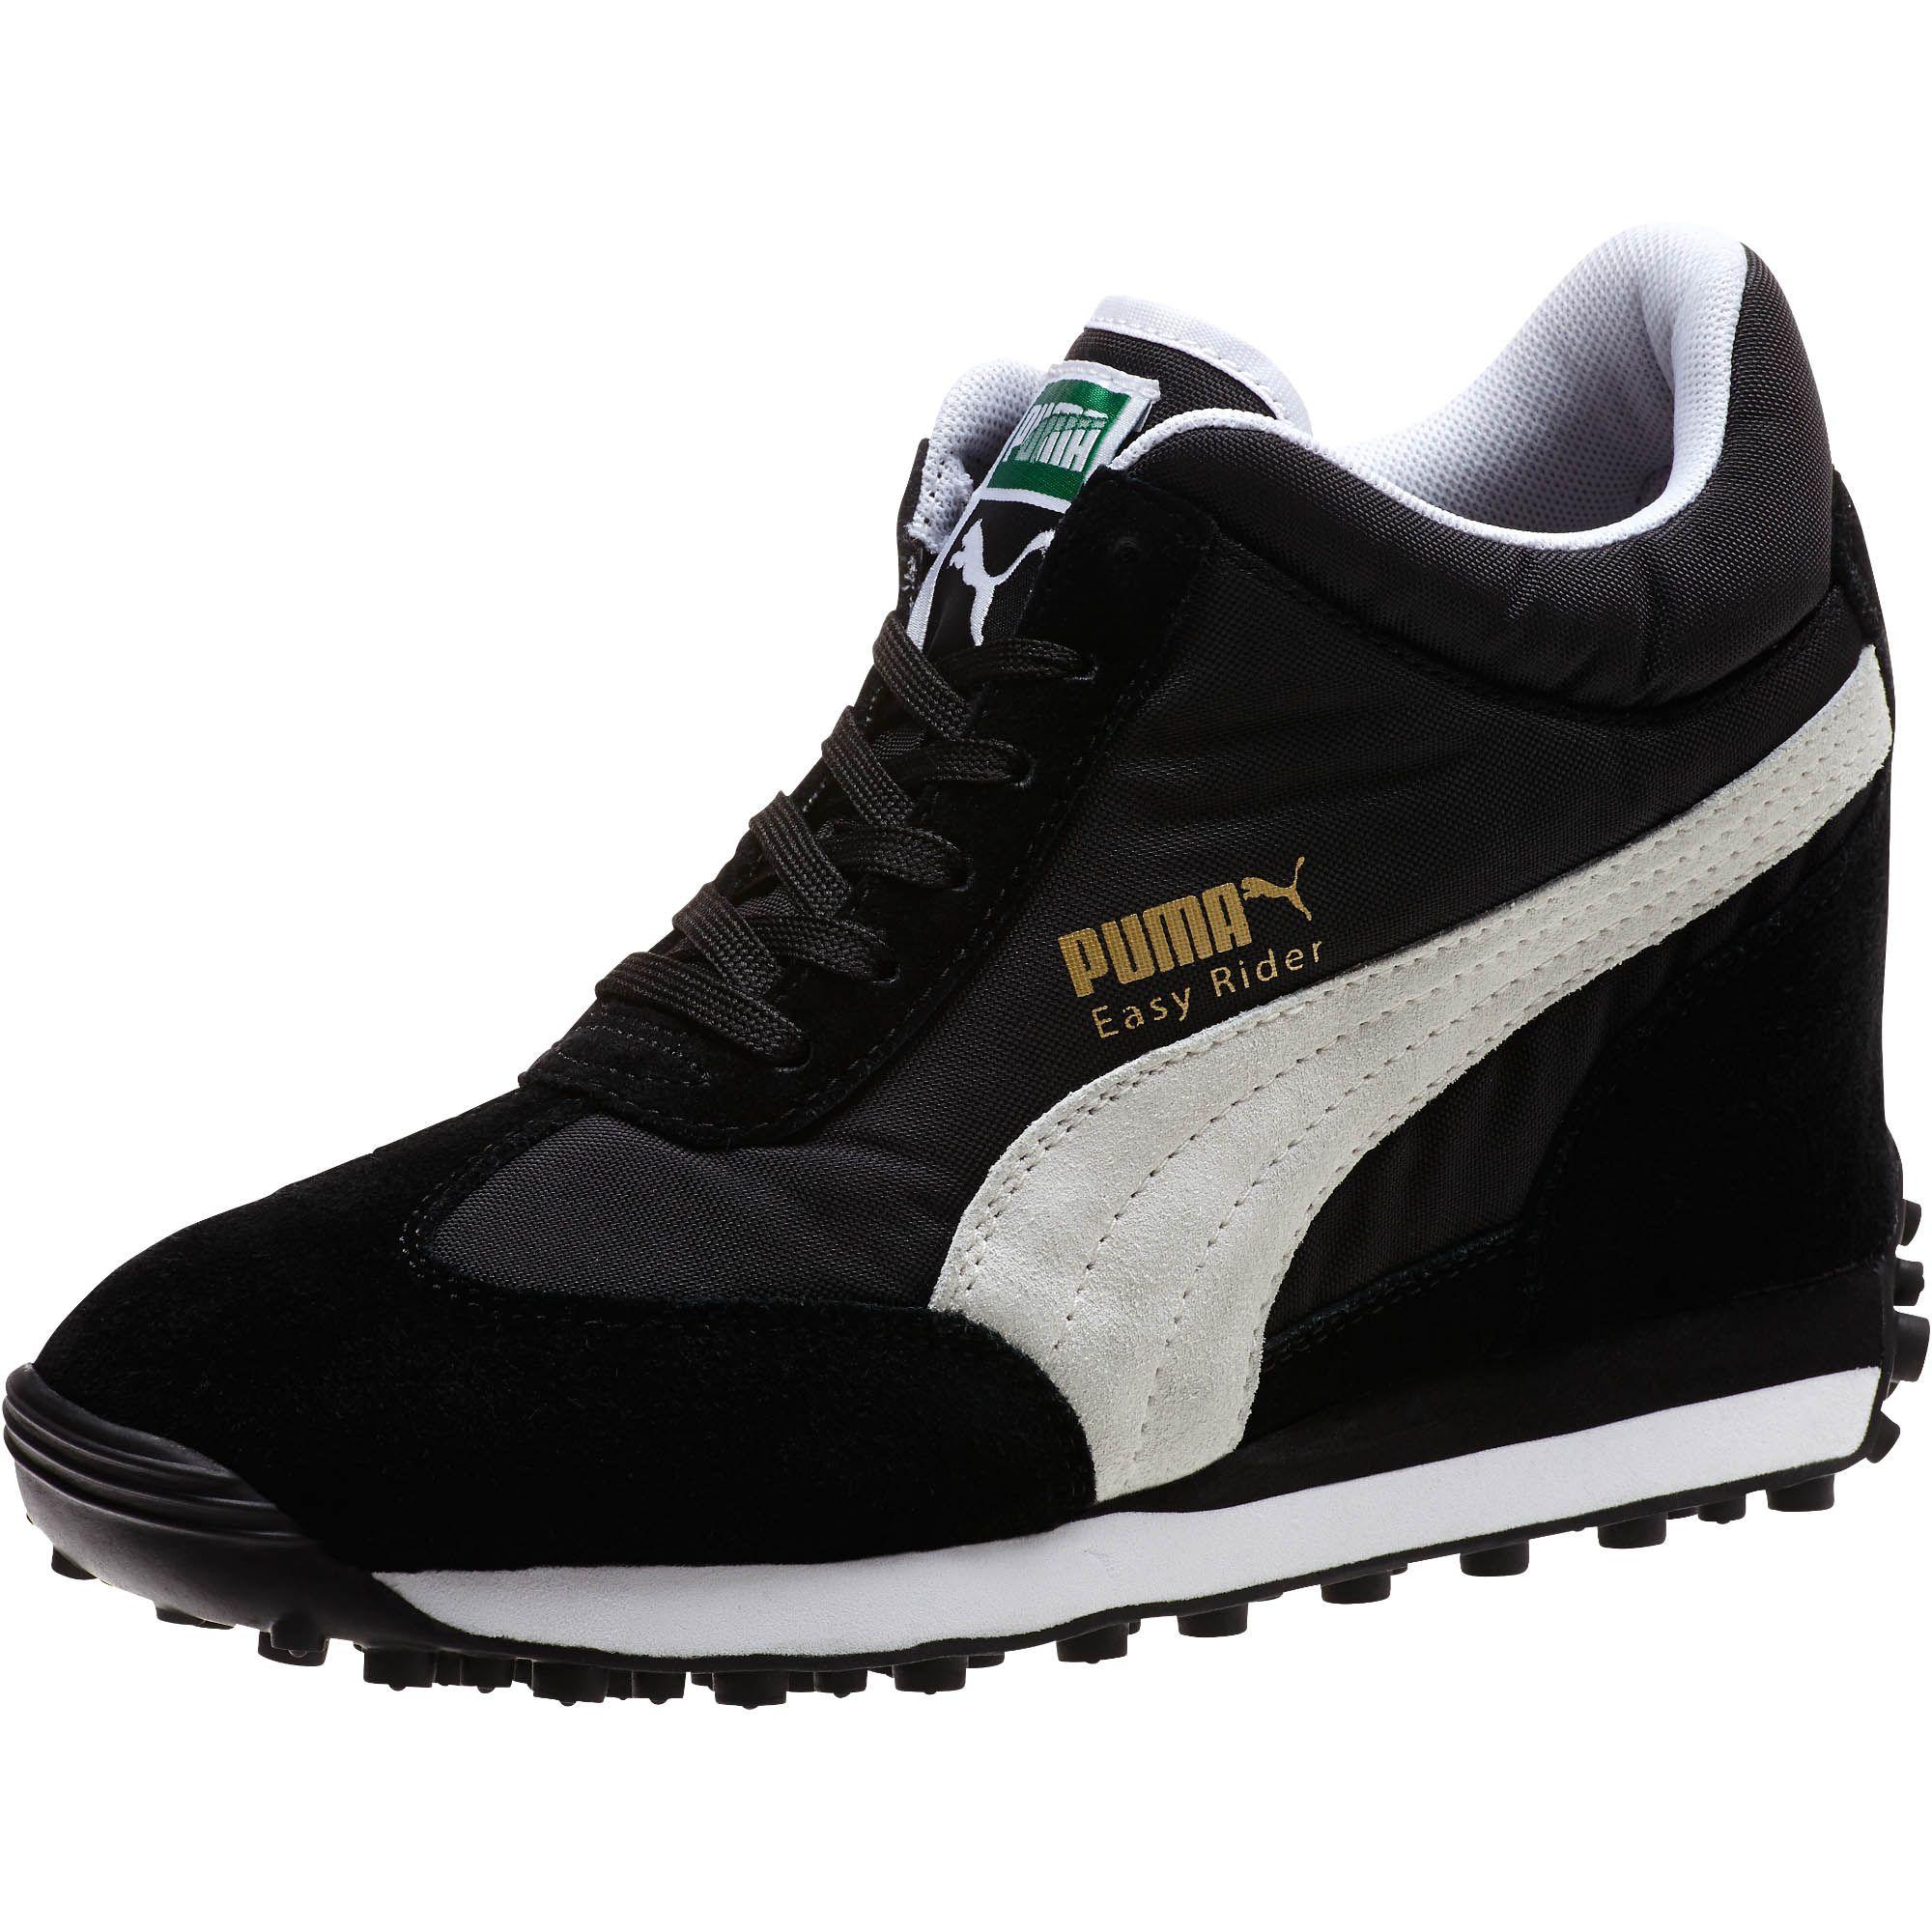 PUMA Synthetic Easy Rider Wedge Lo Women's Wedge Sneakers in Black-White  (Black) - Lyst